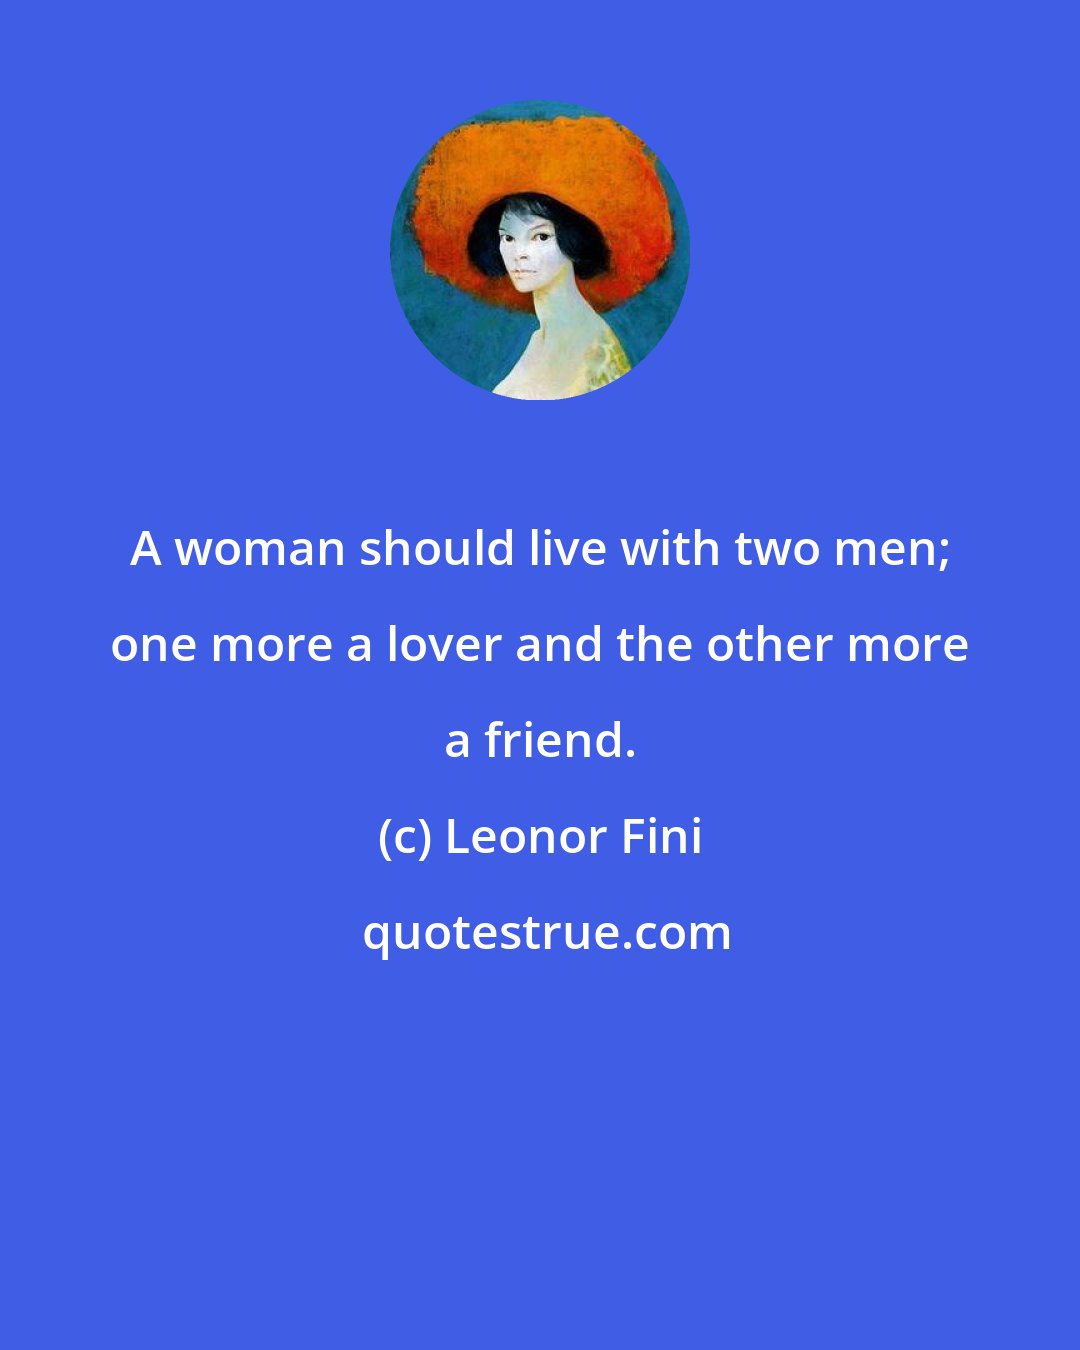 Leonor Fini: A woman should live with two men; one more a lover and the other more a friend.